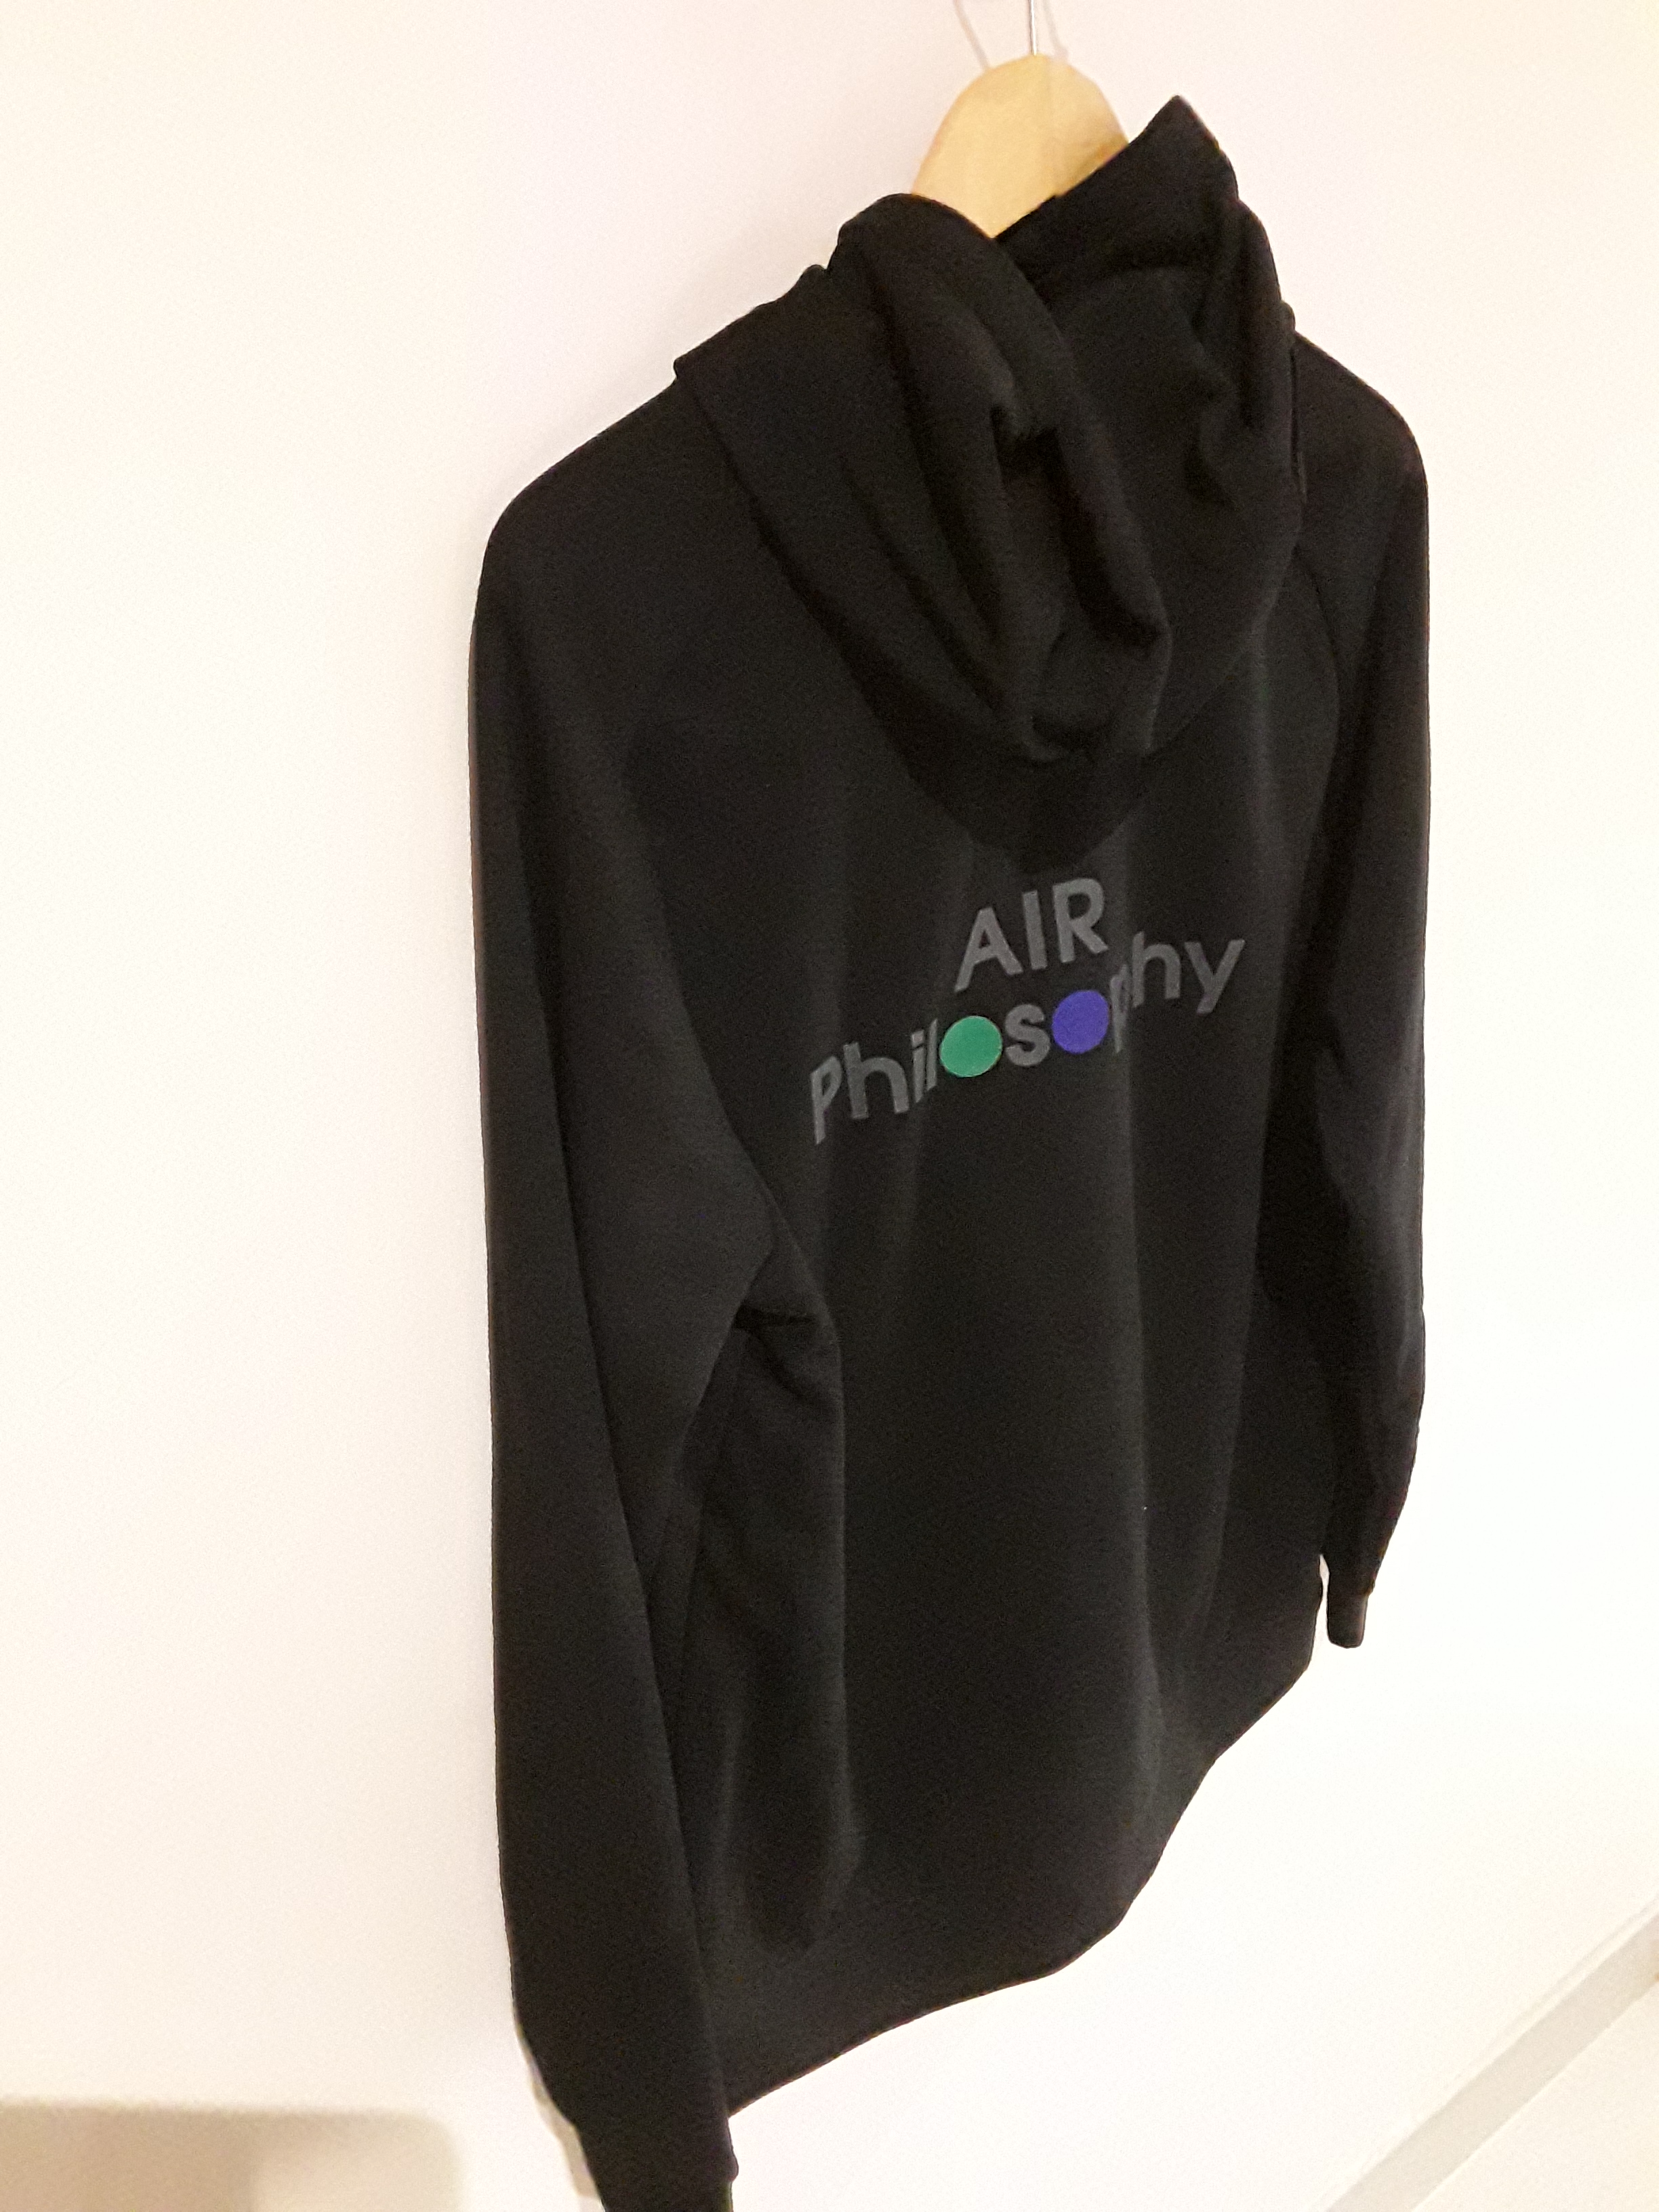 AIR PHILOSOPHY - LOGO JUMPER : select item to access Pay Monthly Link )